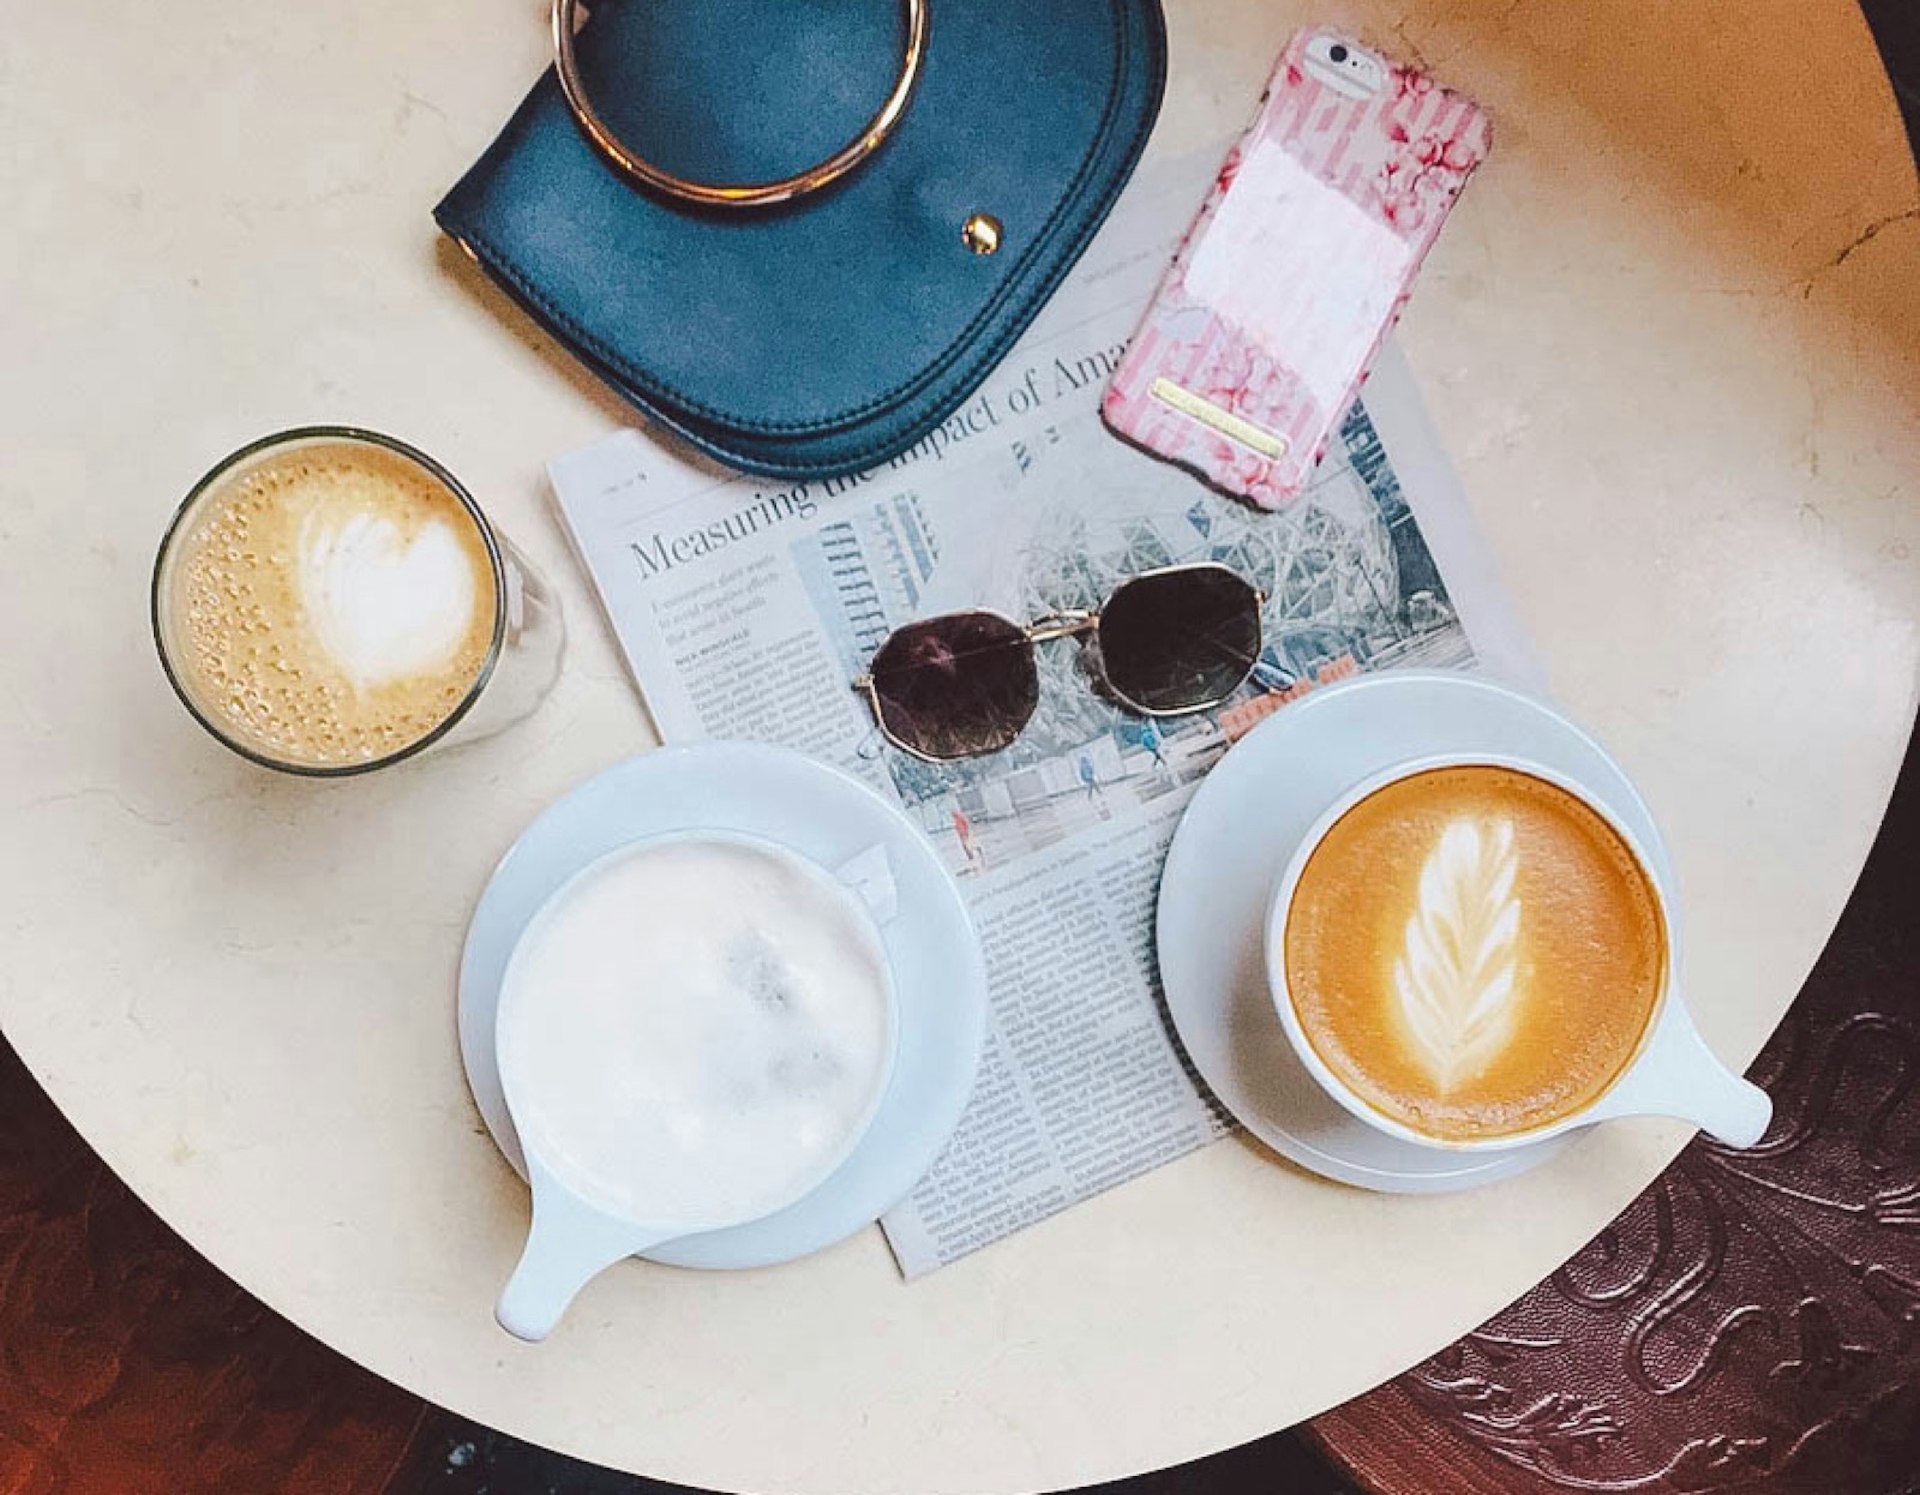 Mugs of coffee sit on a table along with a purse, sunglasses and a newspaper © Jessica Lam / Lonely Planet